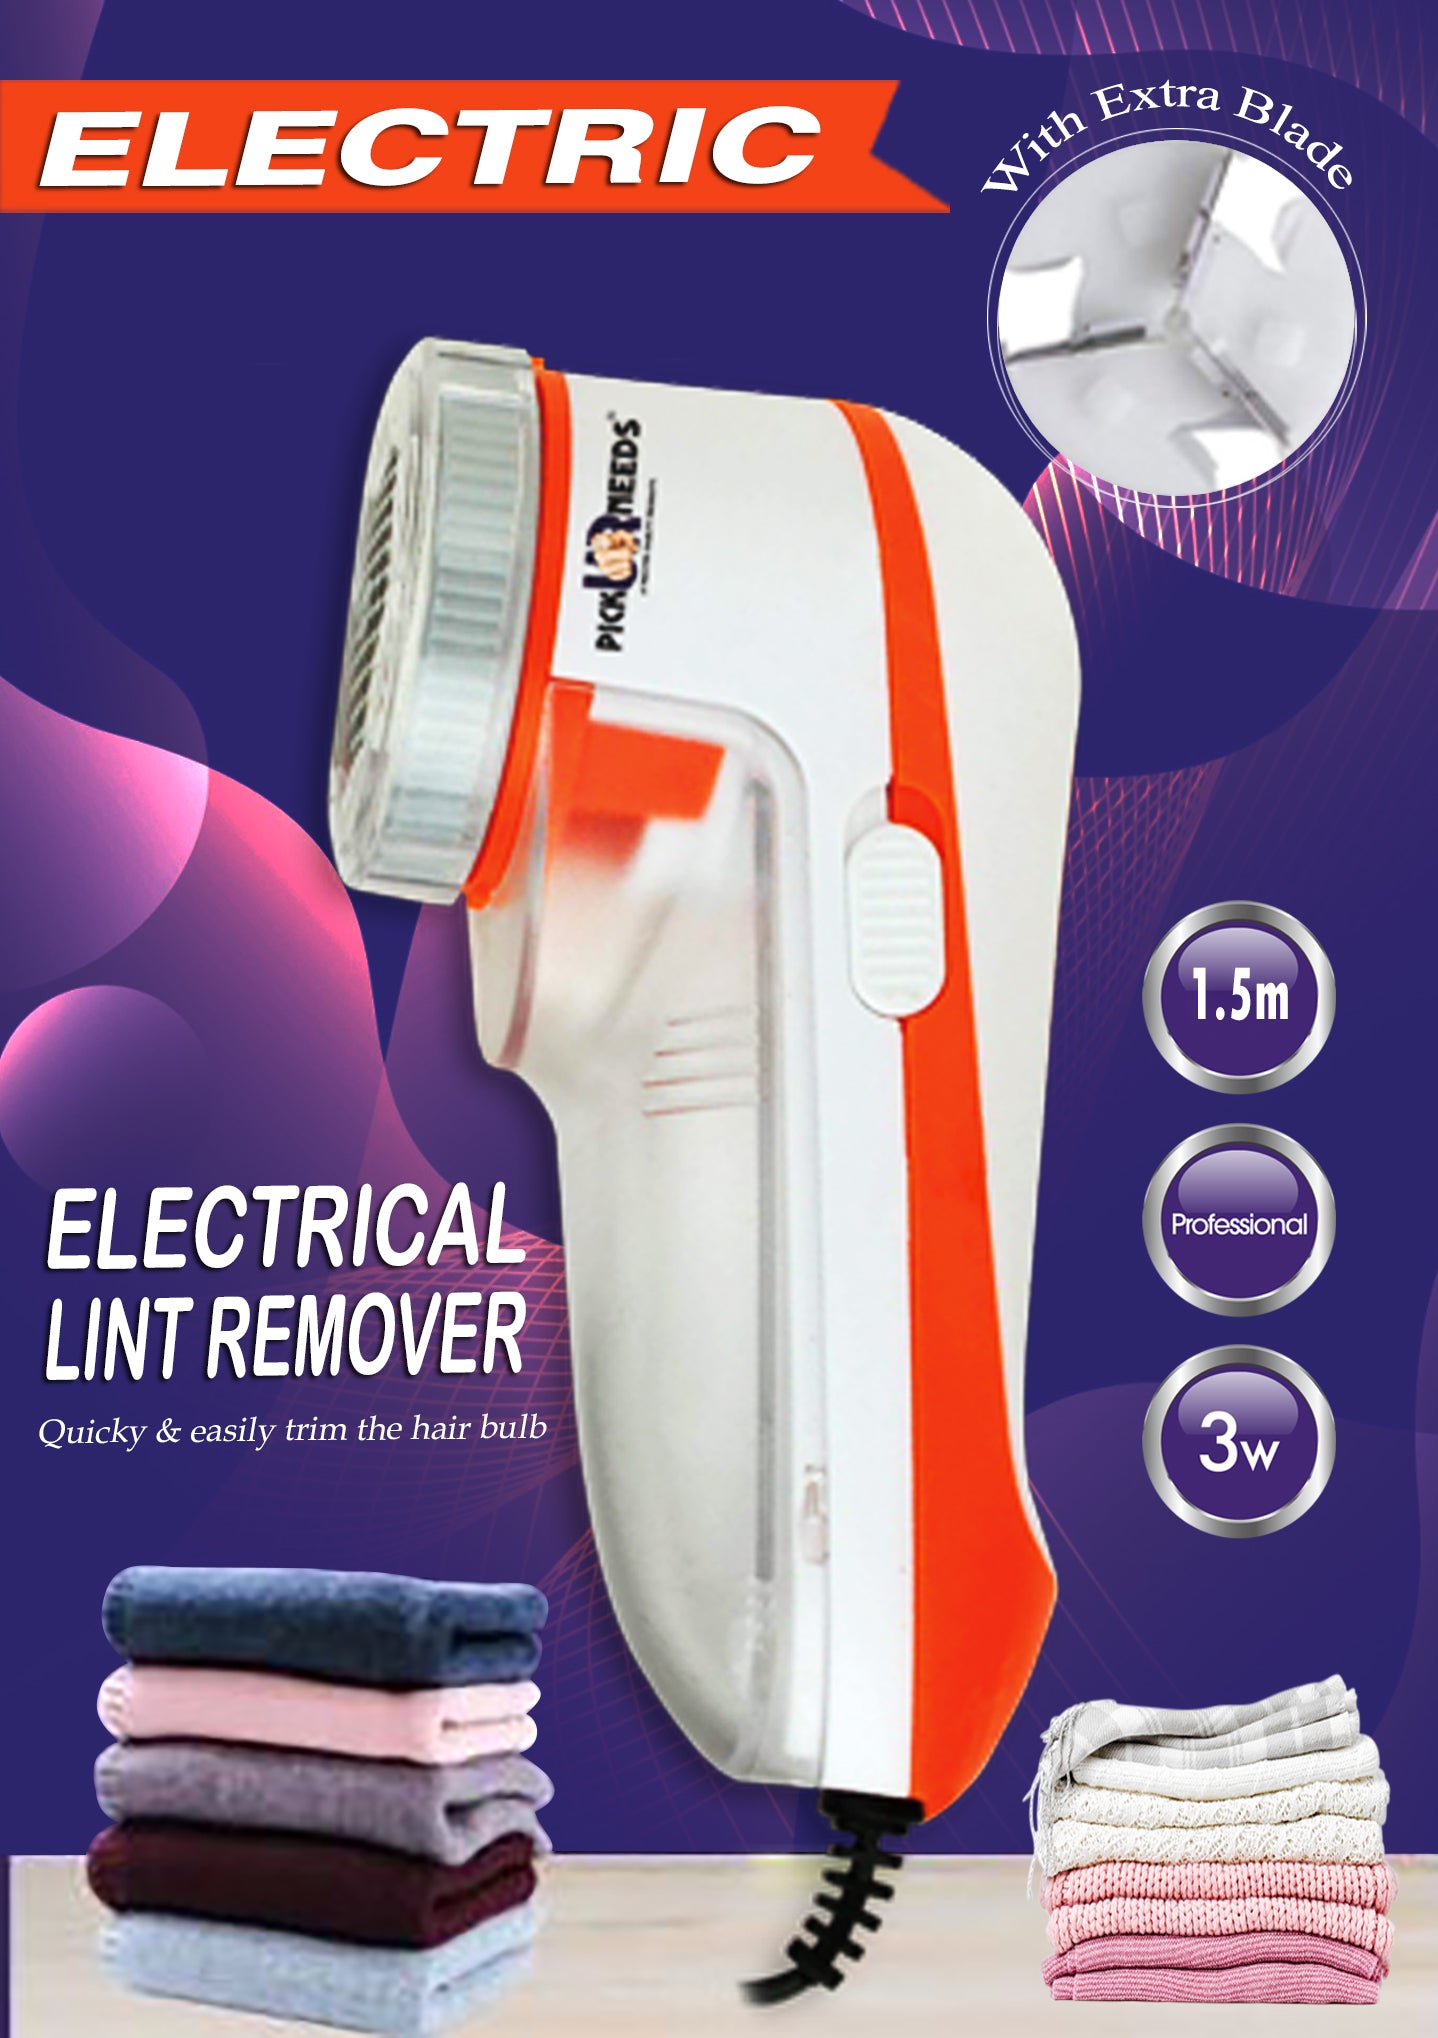 Pick Ur Needs Lint Remover for Clothes & Fabric Shaver for Woolen Clothes fuzz and pill Remover for carpet, sofa and sweaters